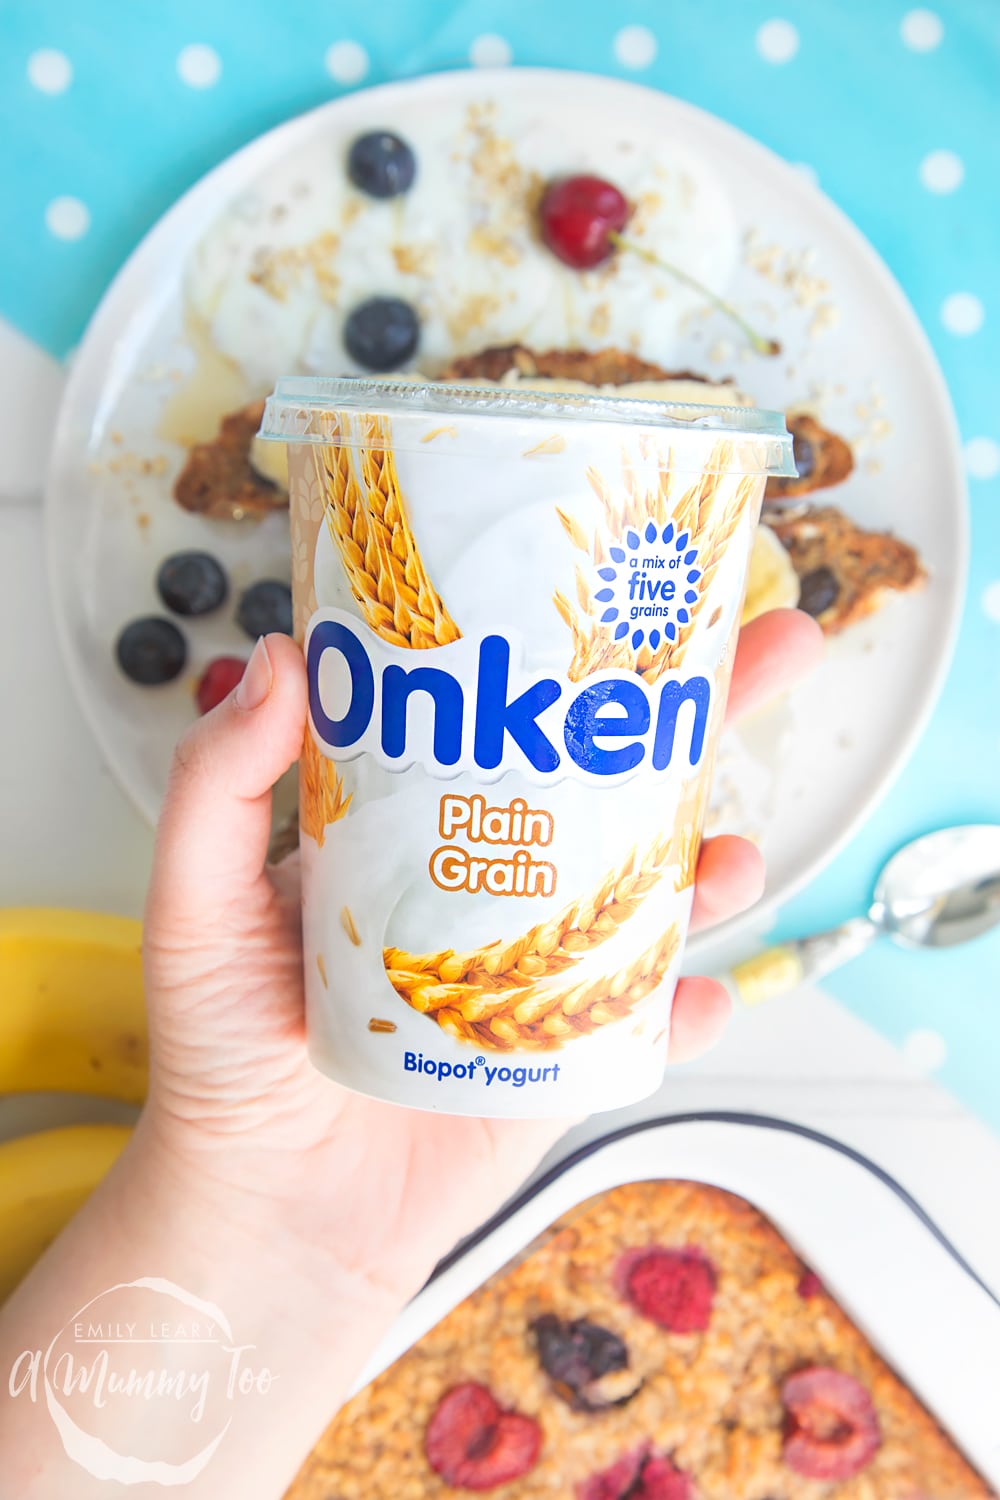 Onken Plain Grain, used in this recipe instead of buttermilk, creating a delicious crumb